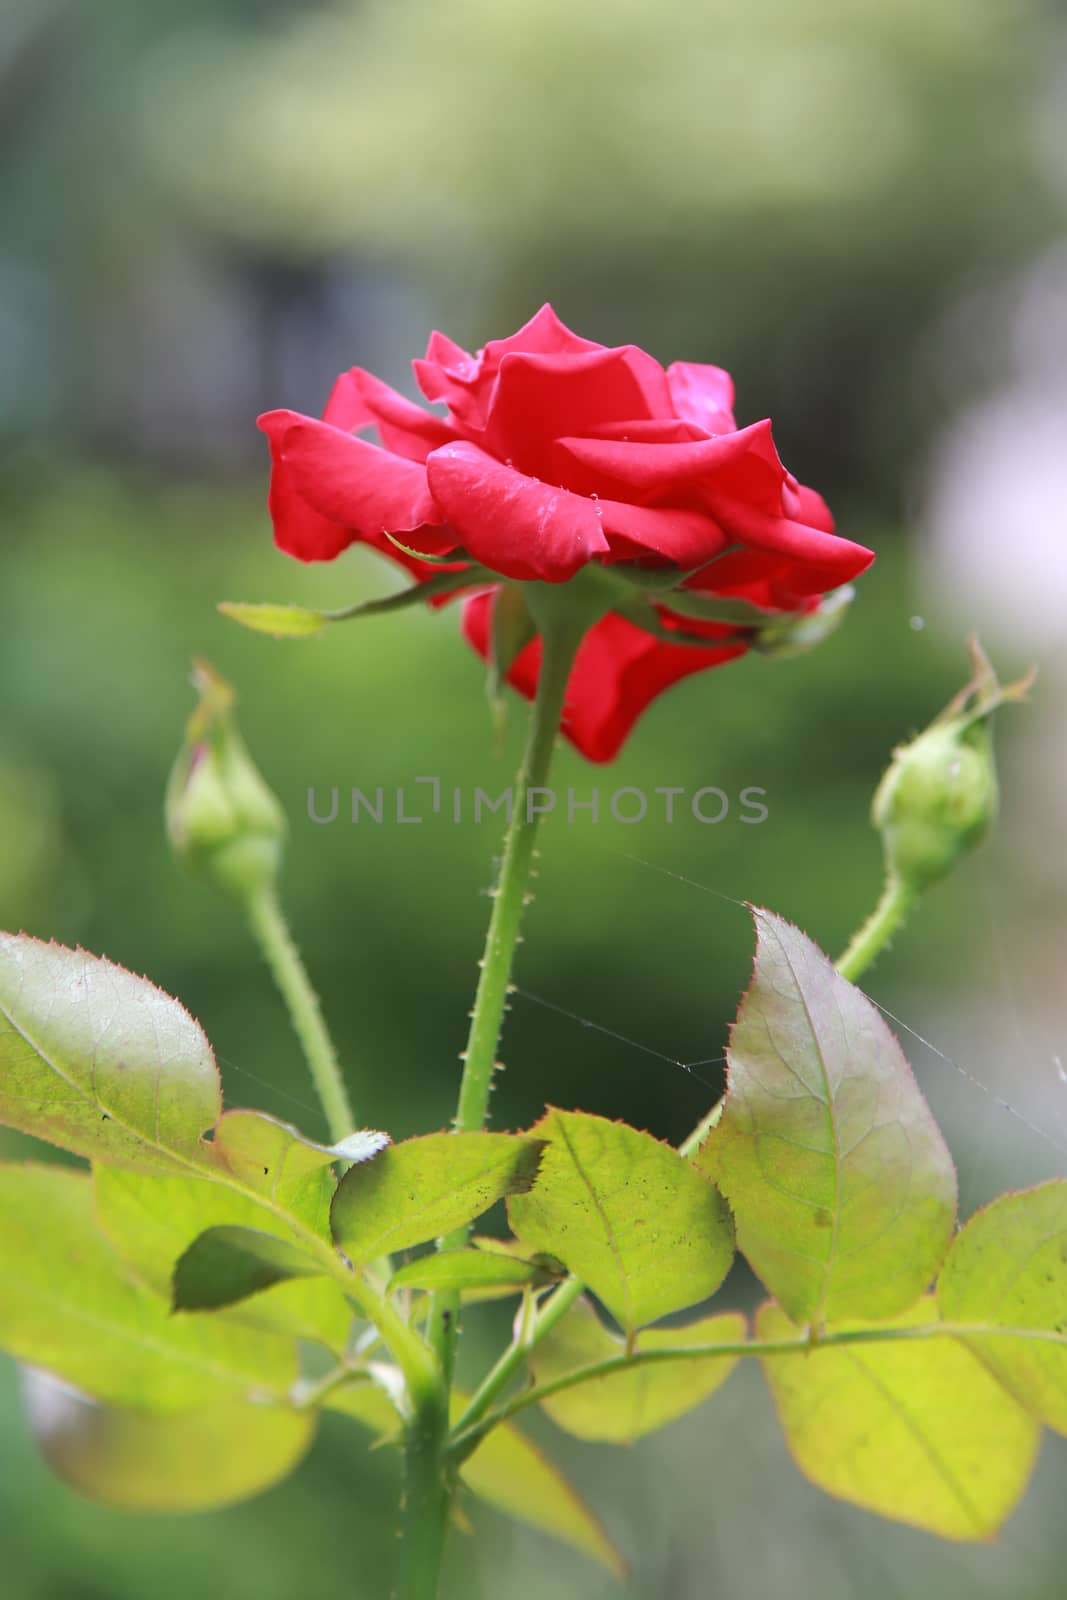 red rose is symbol of love, love like a rose "beautiful and has thorn"